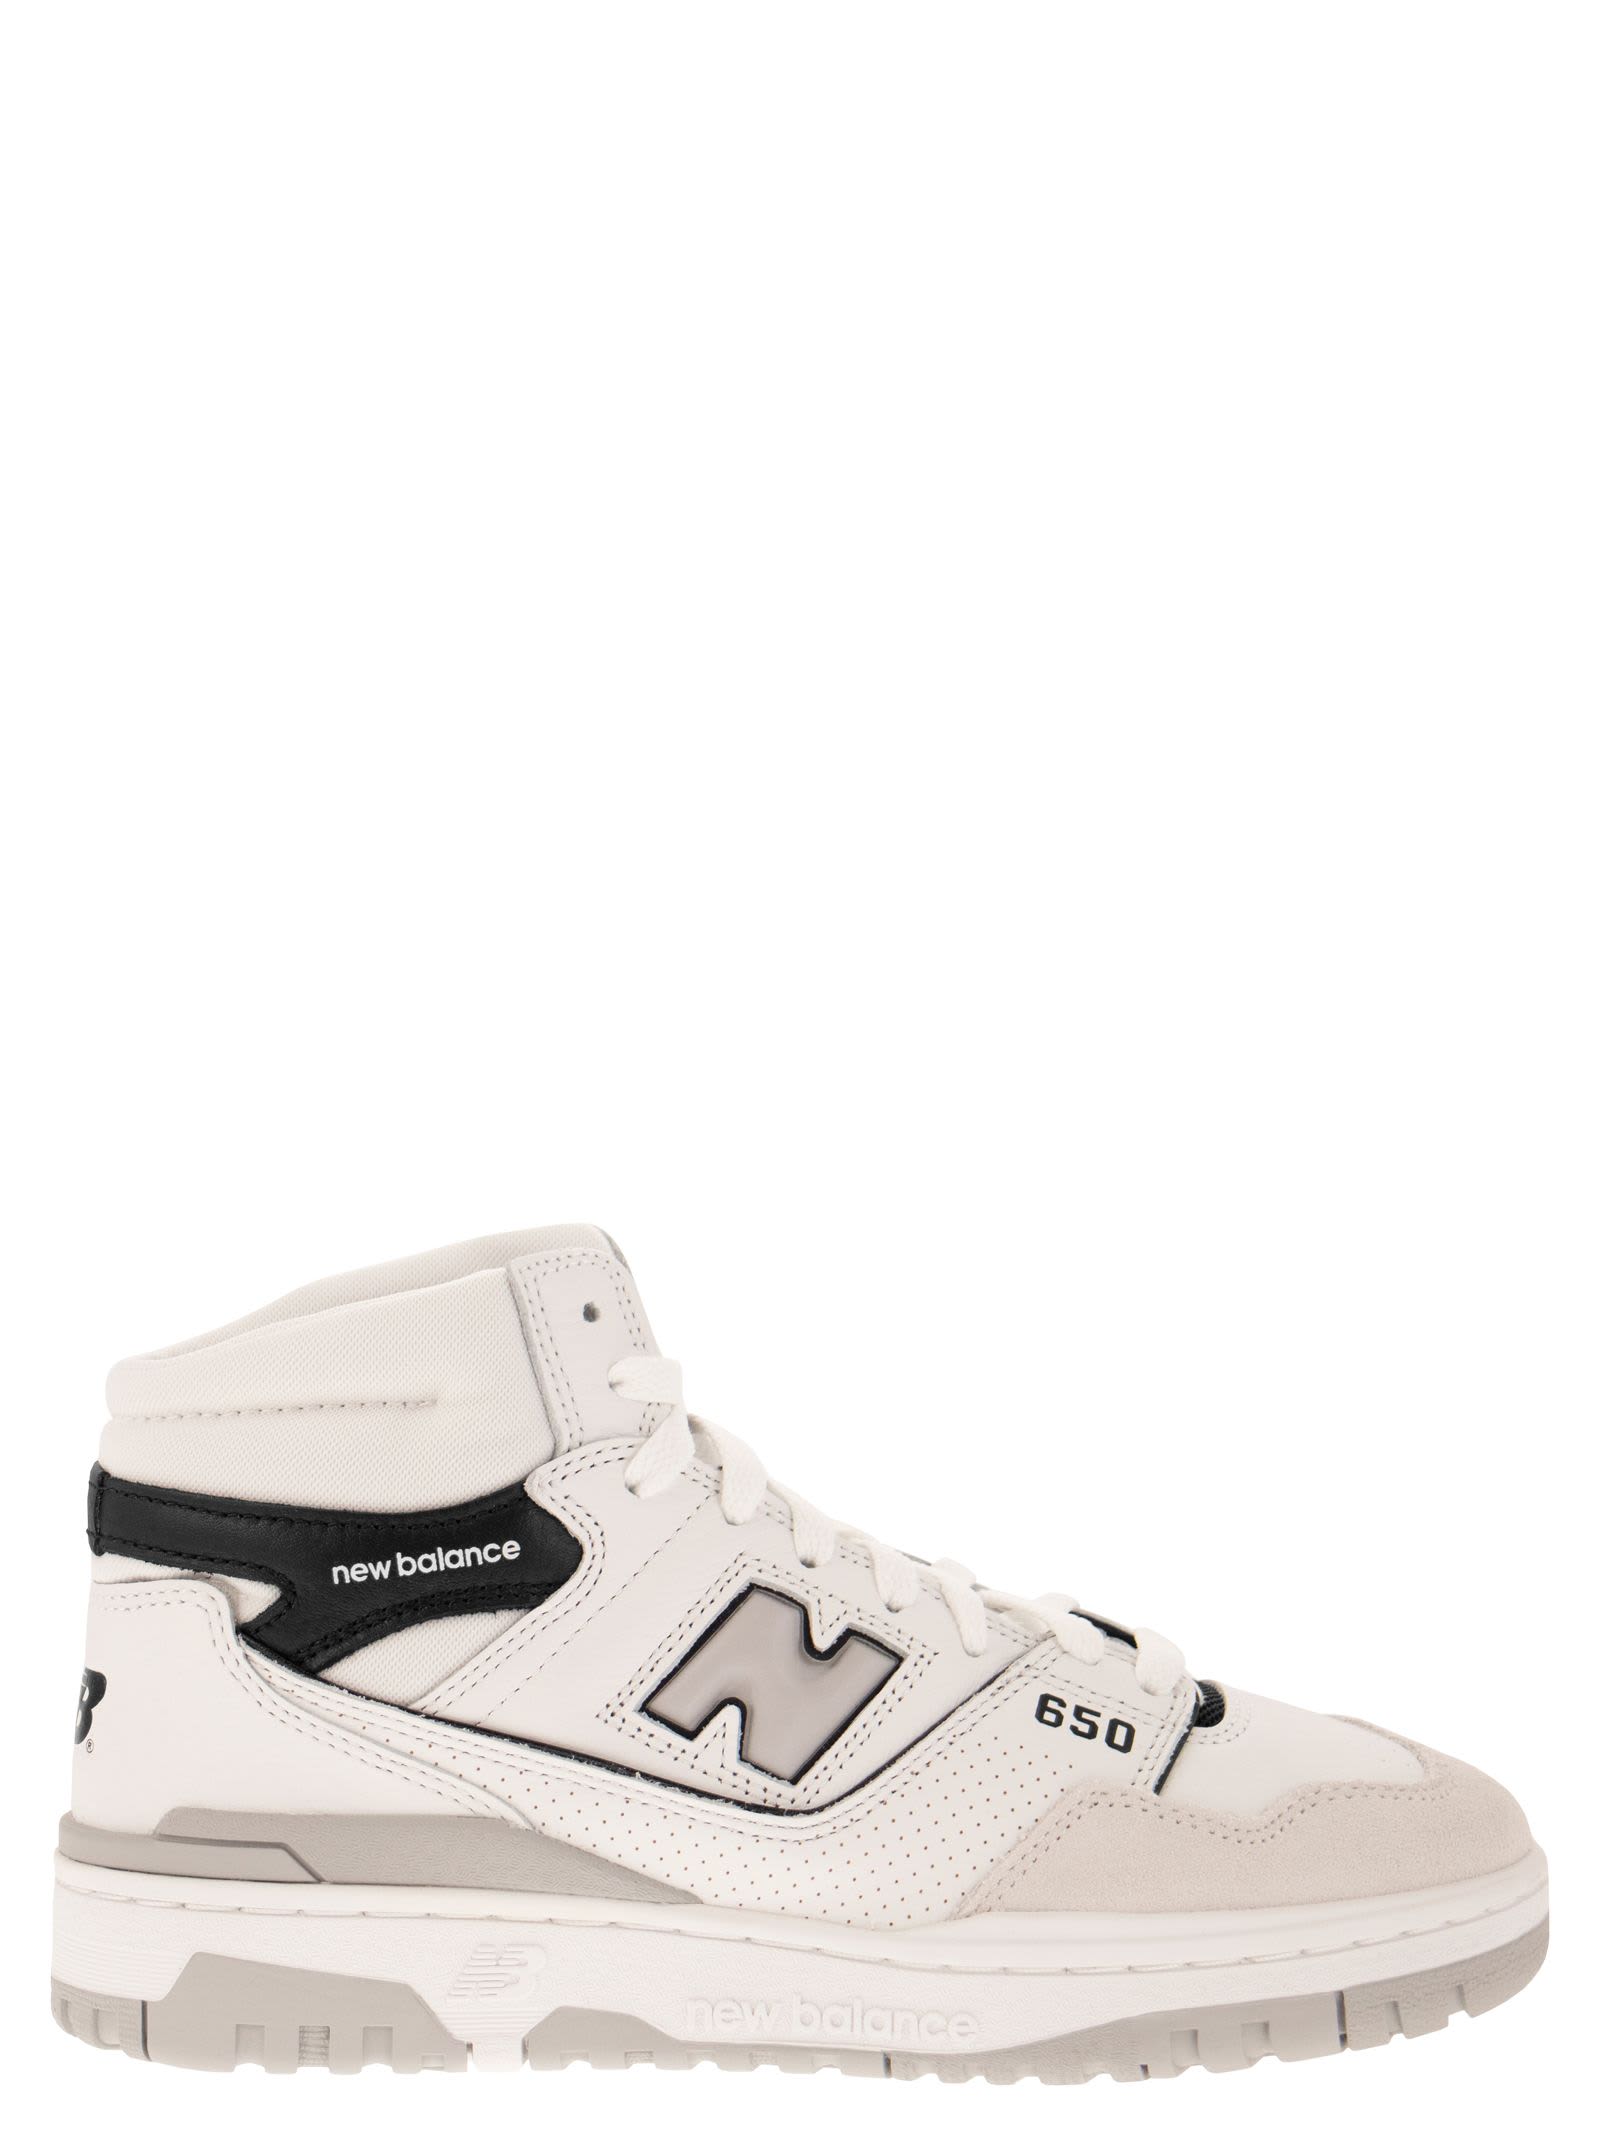 Shop New Balance Bb650 - Sneakers In White